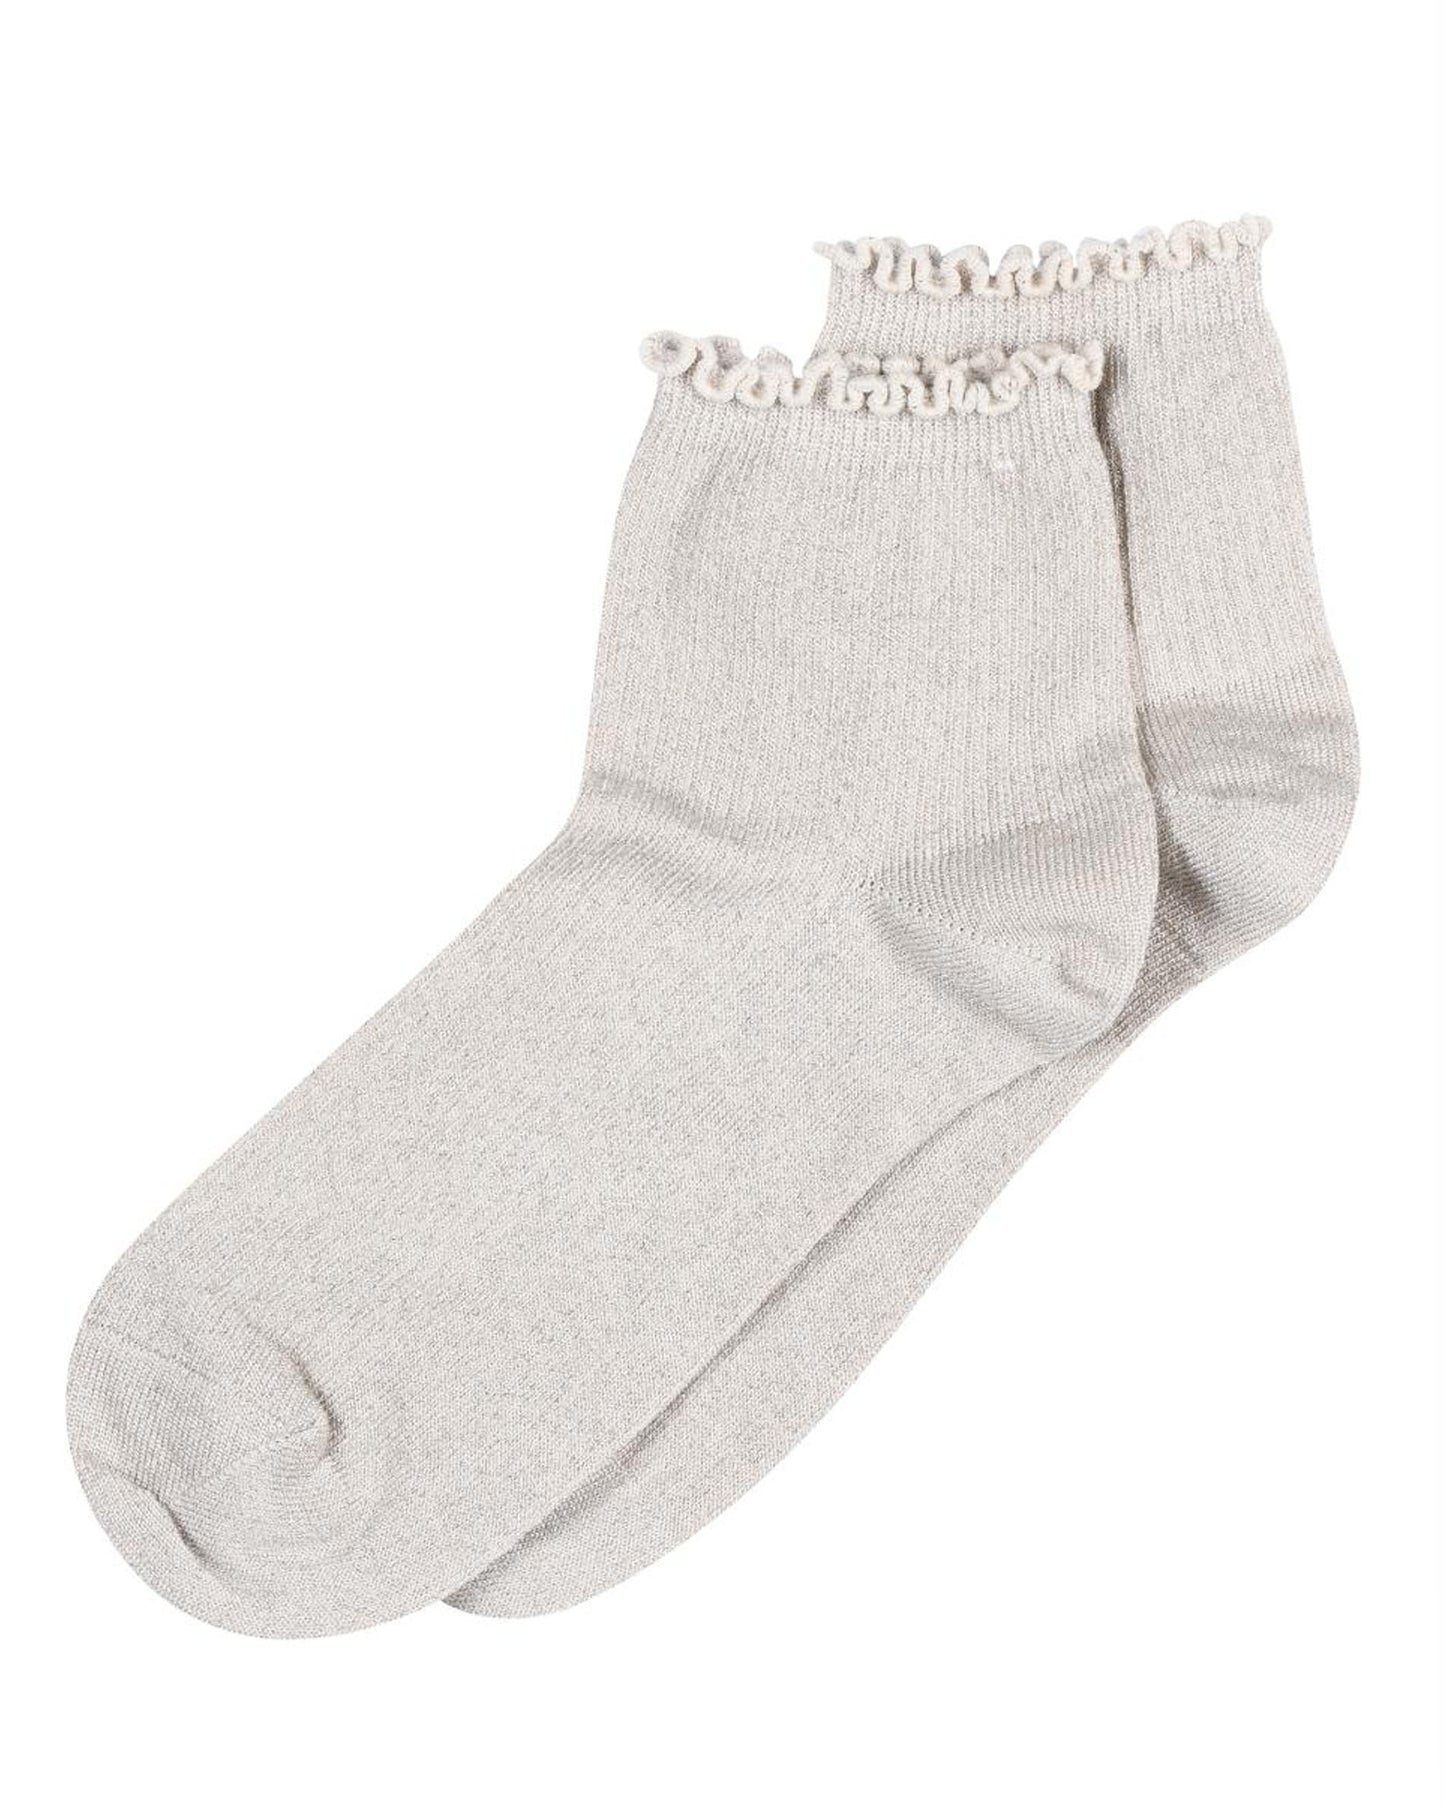 MP Denmark Lis Sock - Champagne oat beige short quarter high ribbed lamé lurex cotton lined ankle socks with with frilly edge, plain sole, shaped heel and flat toe seam.